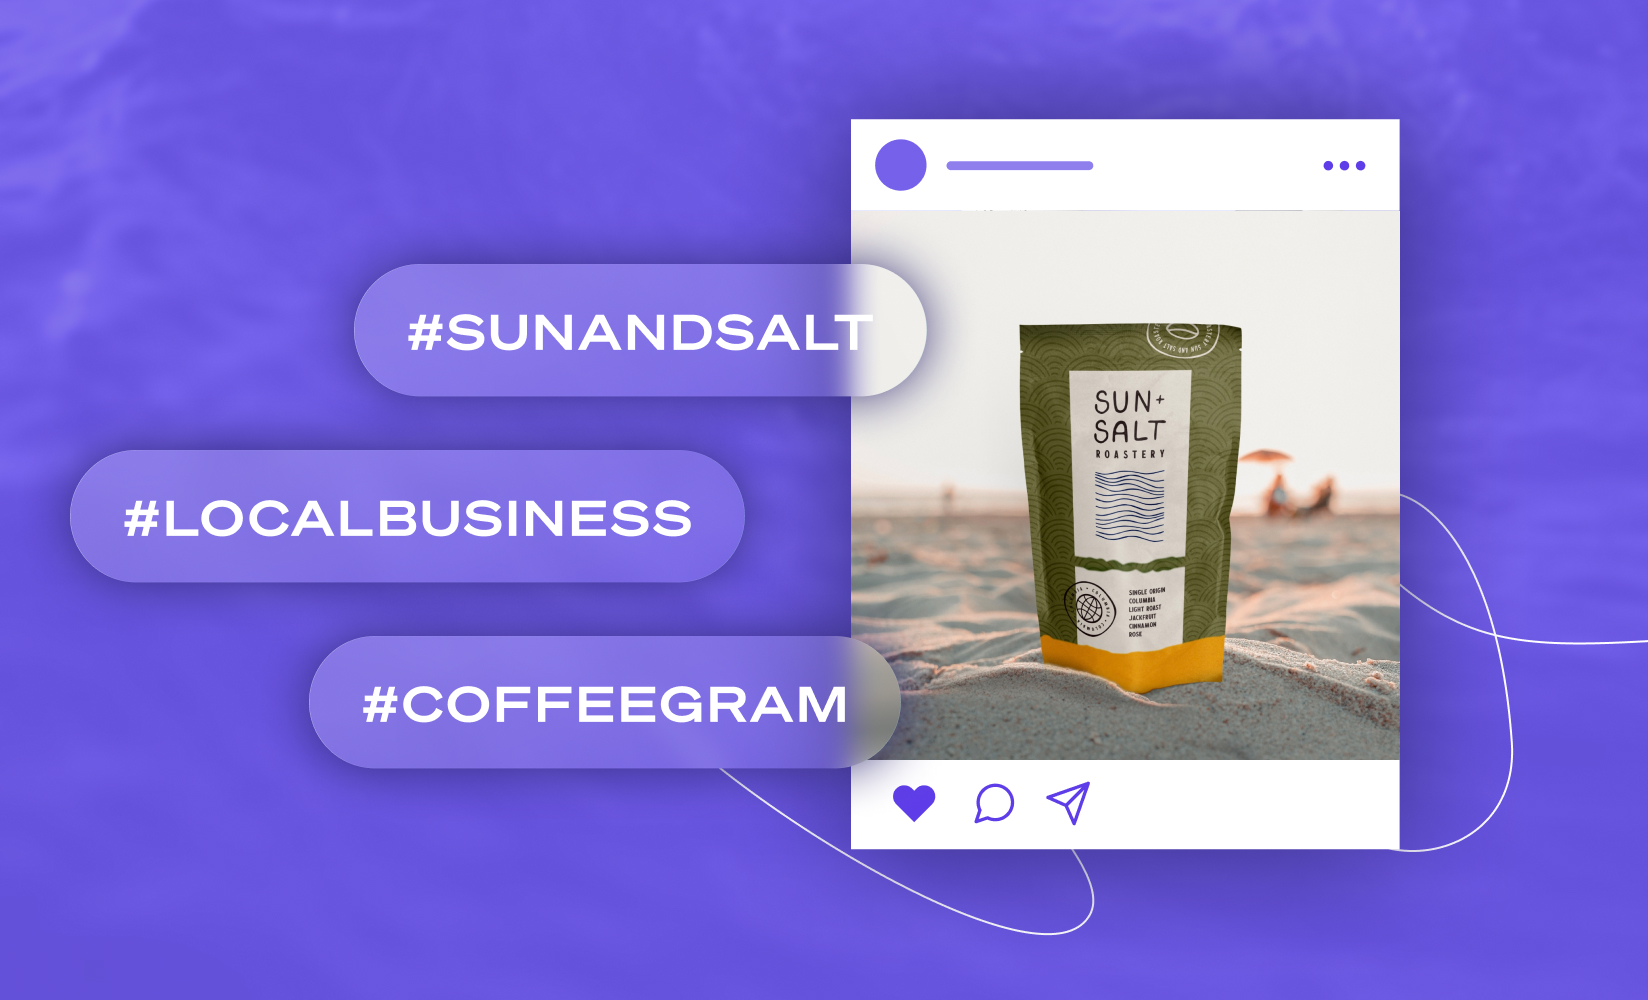 The Complete Guide to Using Instagram Hashtags for Ecommerce instagram hashtags